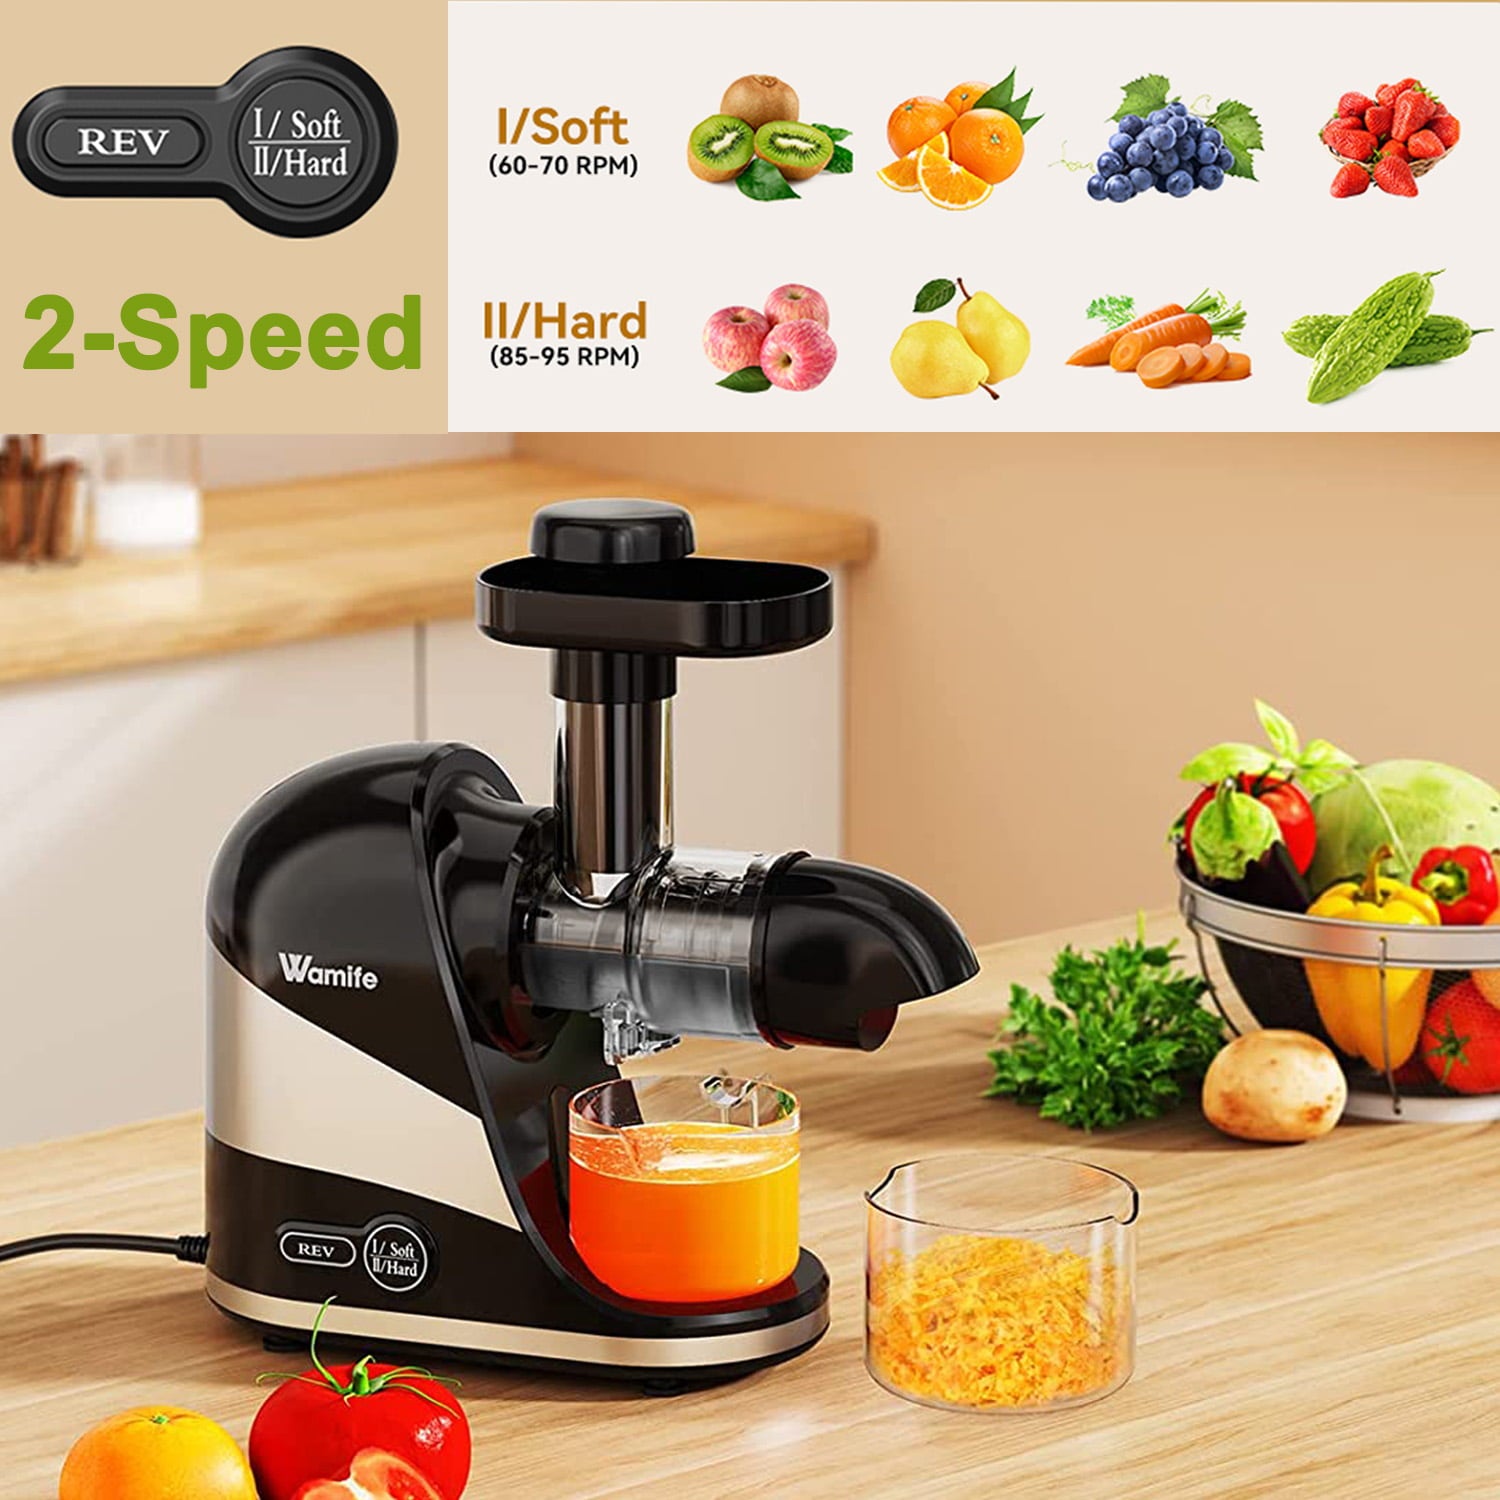 Wamife Juicer Machines 2 Modes Cold Press Juicer Slow Masticating Juicer Extractor with Quiet Motor/Reverse Function for Fruit & Vegetable, Cup & Brush Included